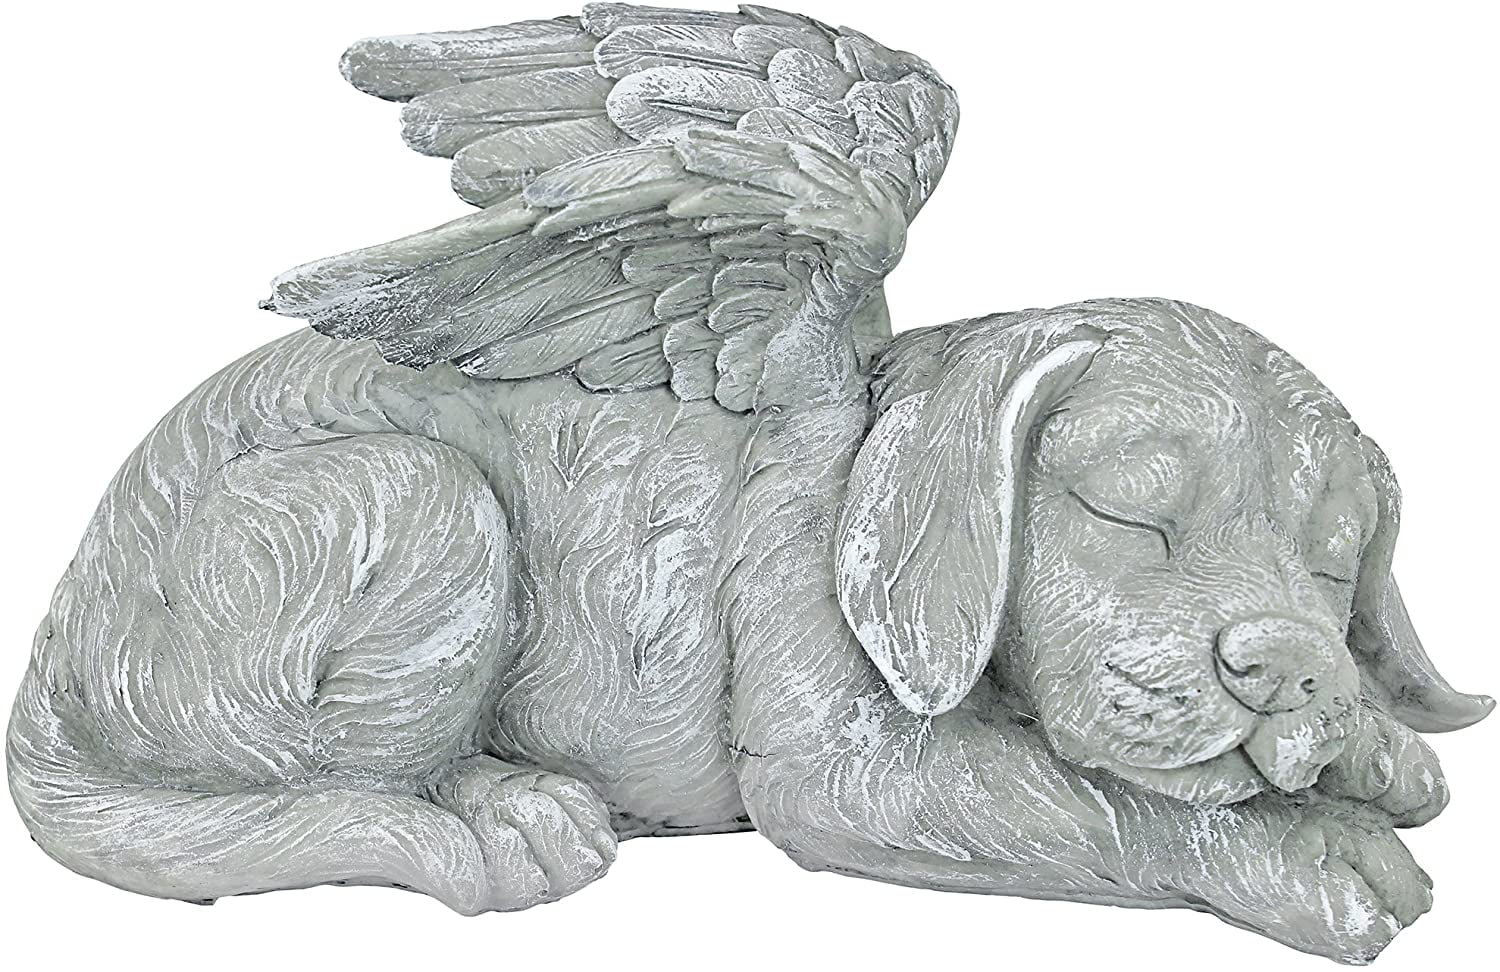 Qians Dog and Cat Angel Pet Memorial Grave Marker Statue Resin Sleeping Angel Dog and Cat with Wings Garden Statues Cat and Dog Statue Memorial Ornament Garden Decor Outdoor unusual